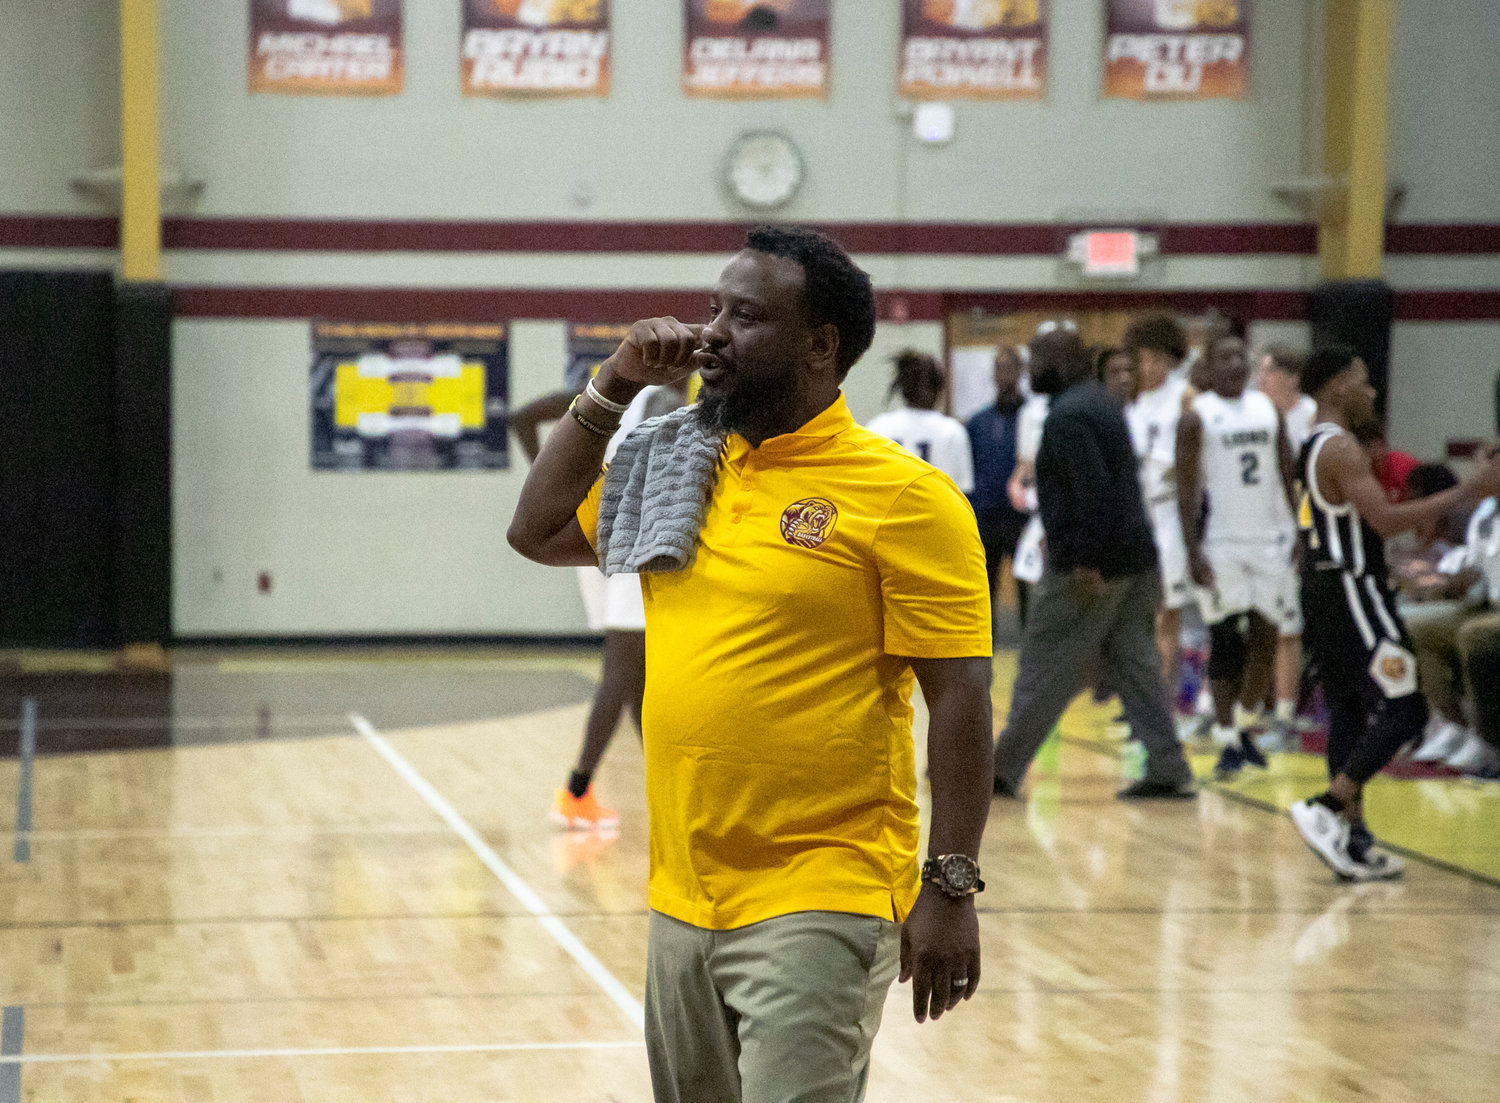 Robertsdale head boys’ basketball coach Marshall Davis signals to his team during the Pre-Thanksgiving Tournament game against the Foley Lions at home Nov. 19, 2022. With the Golden Bears’ 57-43 win over Baldwin County Friday night, Davis collected his 200th career win where all have come in Robertsdale.